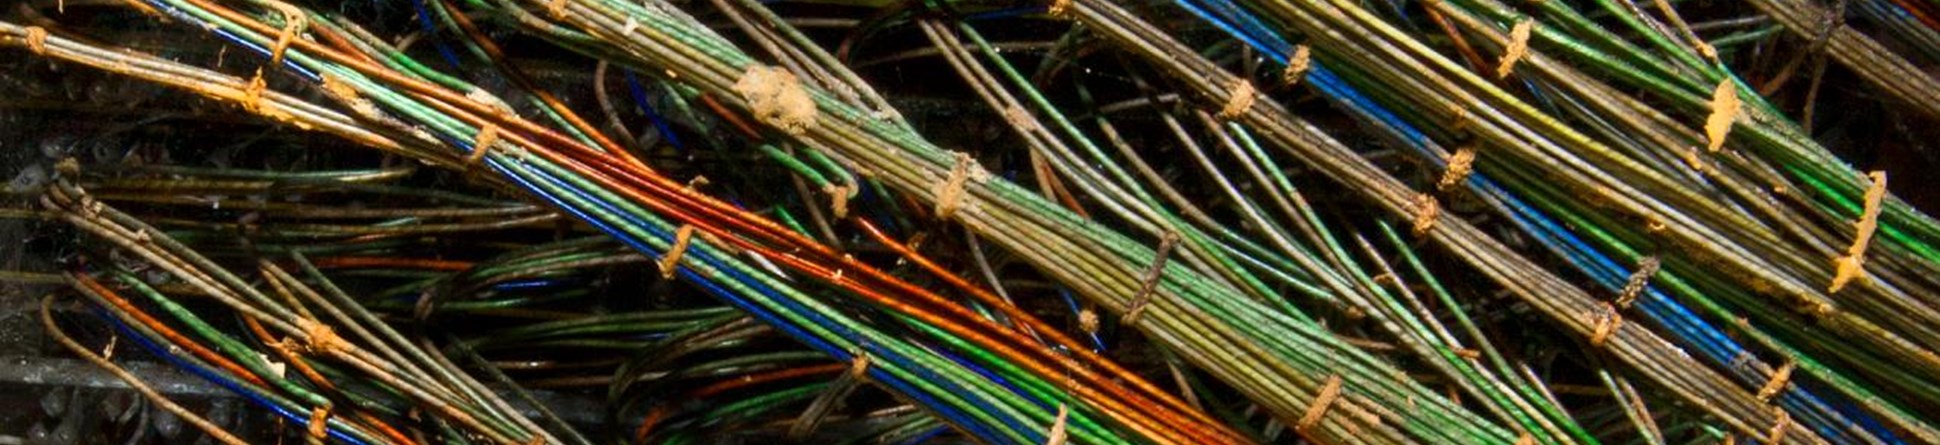 multi-coloured electrical wiring